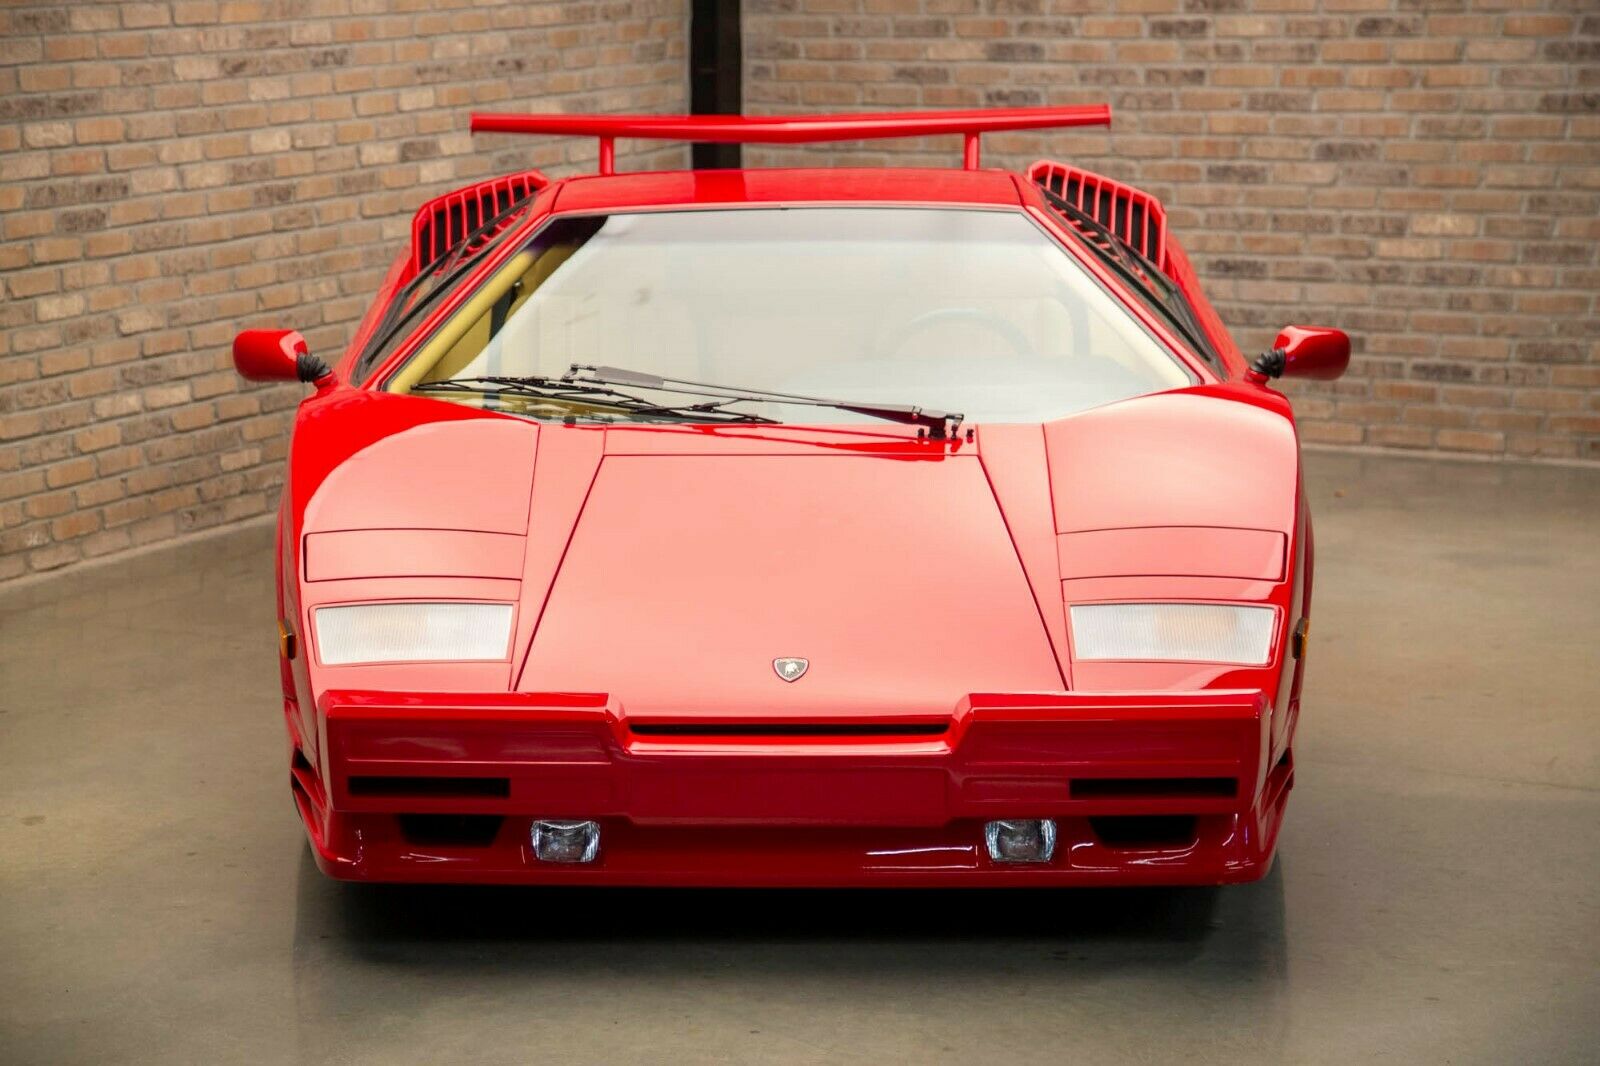 Barely Driven 1989 Lamborghini Countach Is Time Capsule of a Style Icon -   Motors Blog